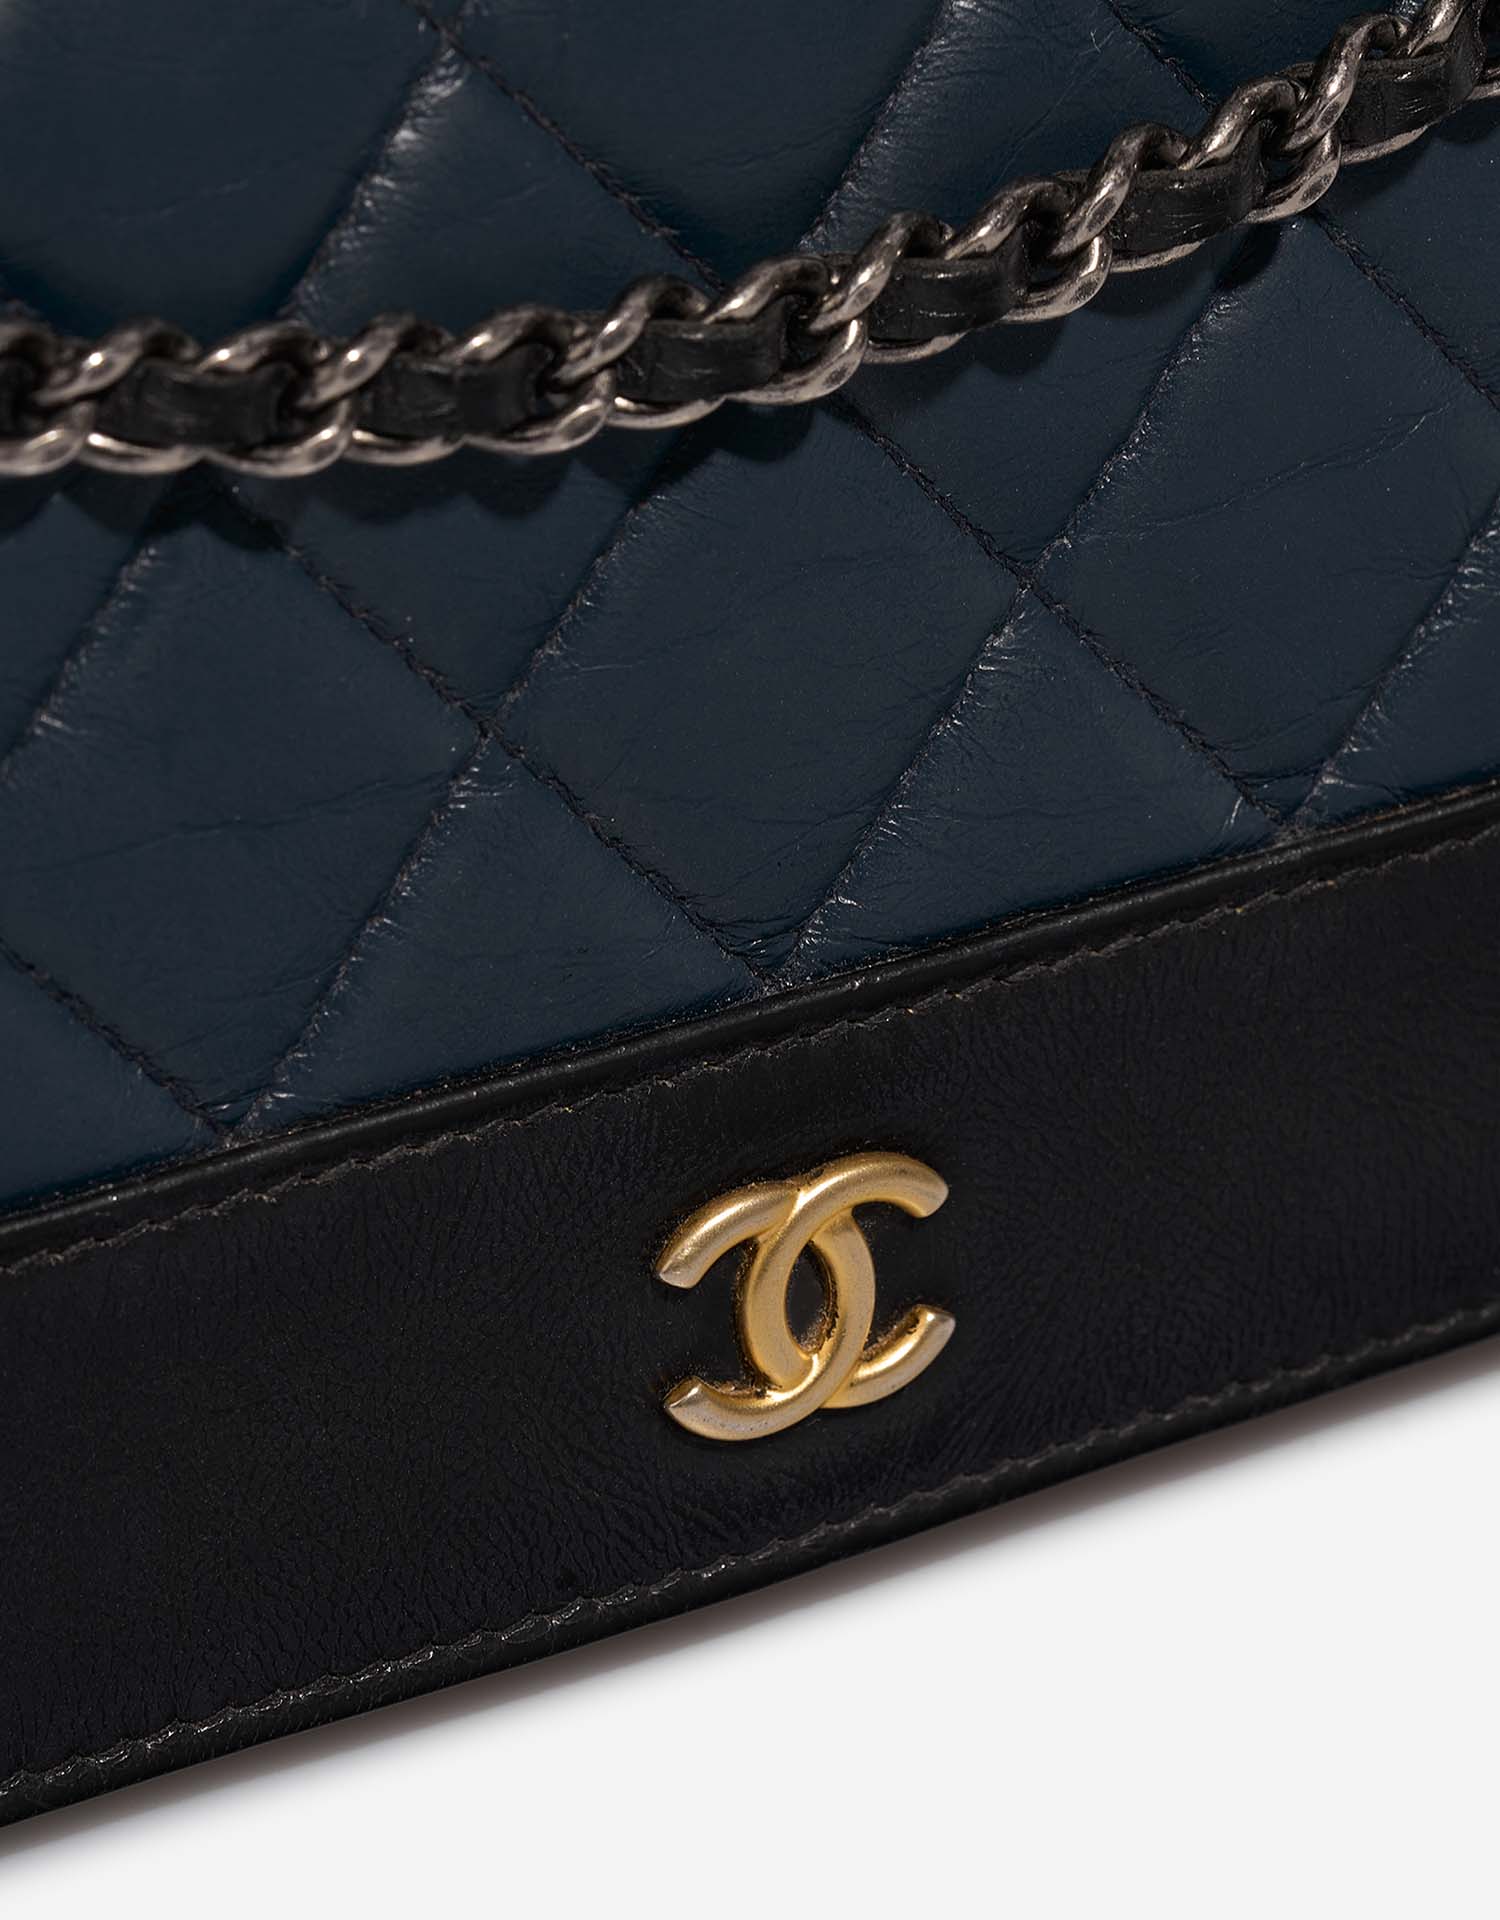 Chanel Timeless Wallet On Chain Lamb Black / Navy